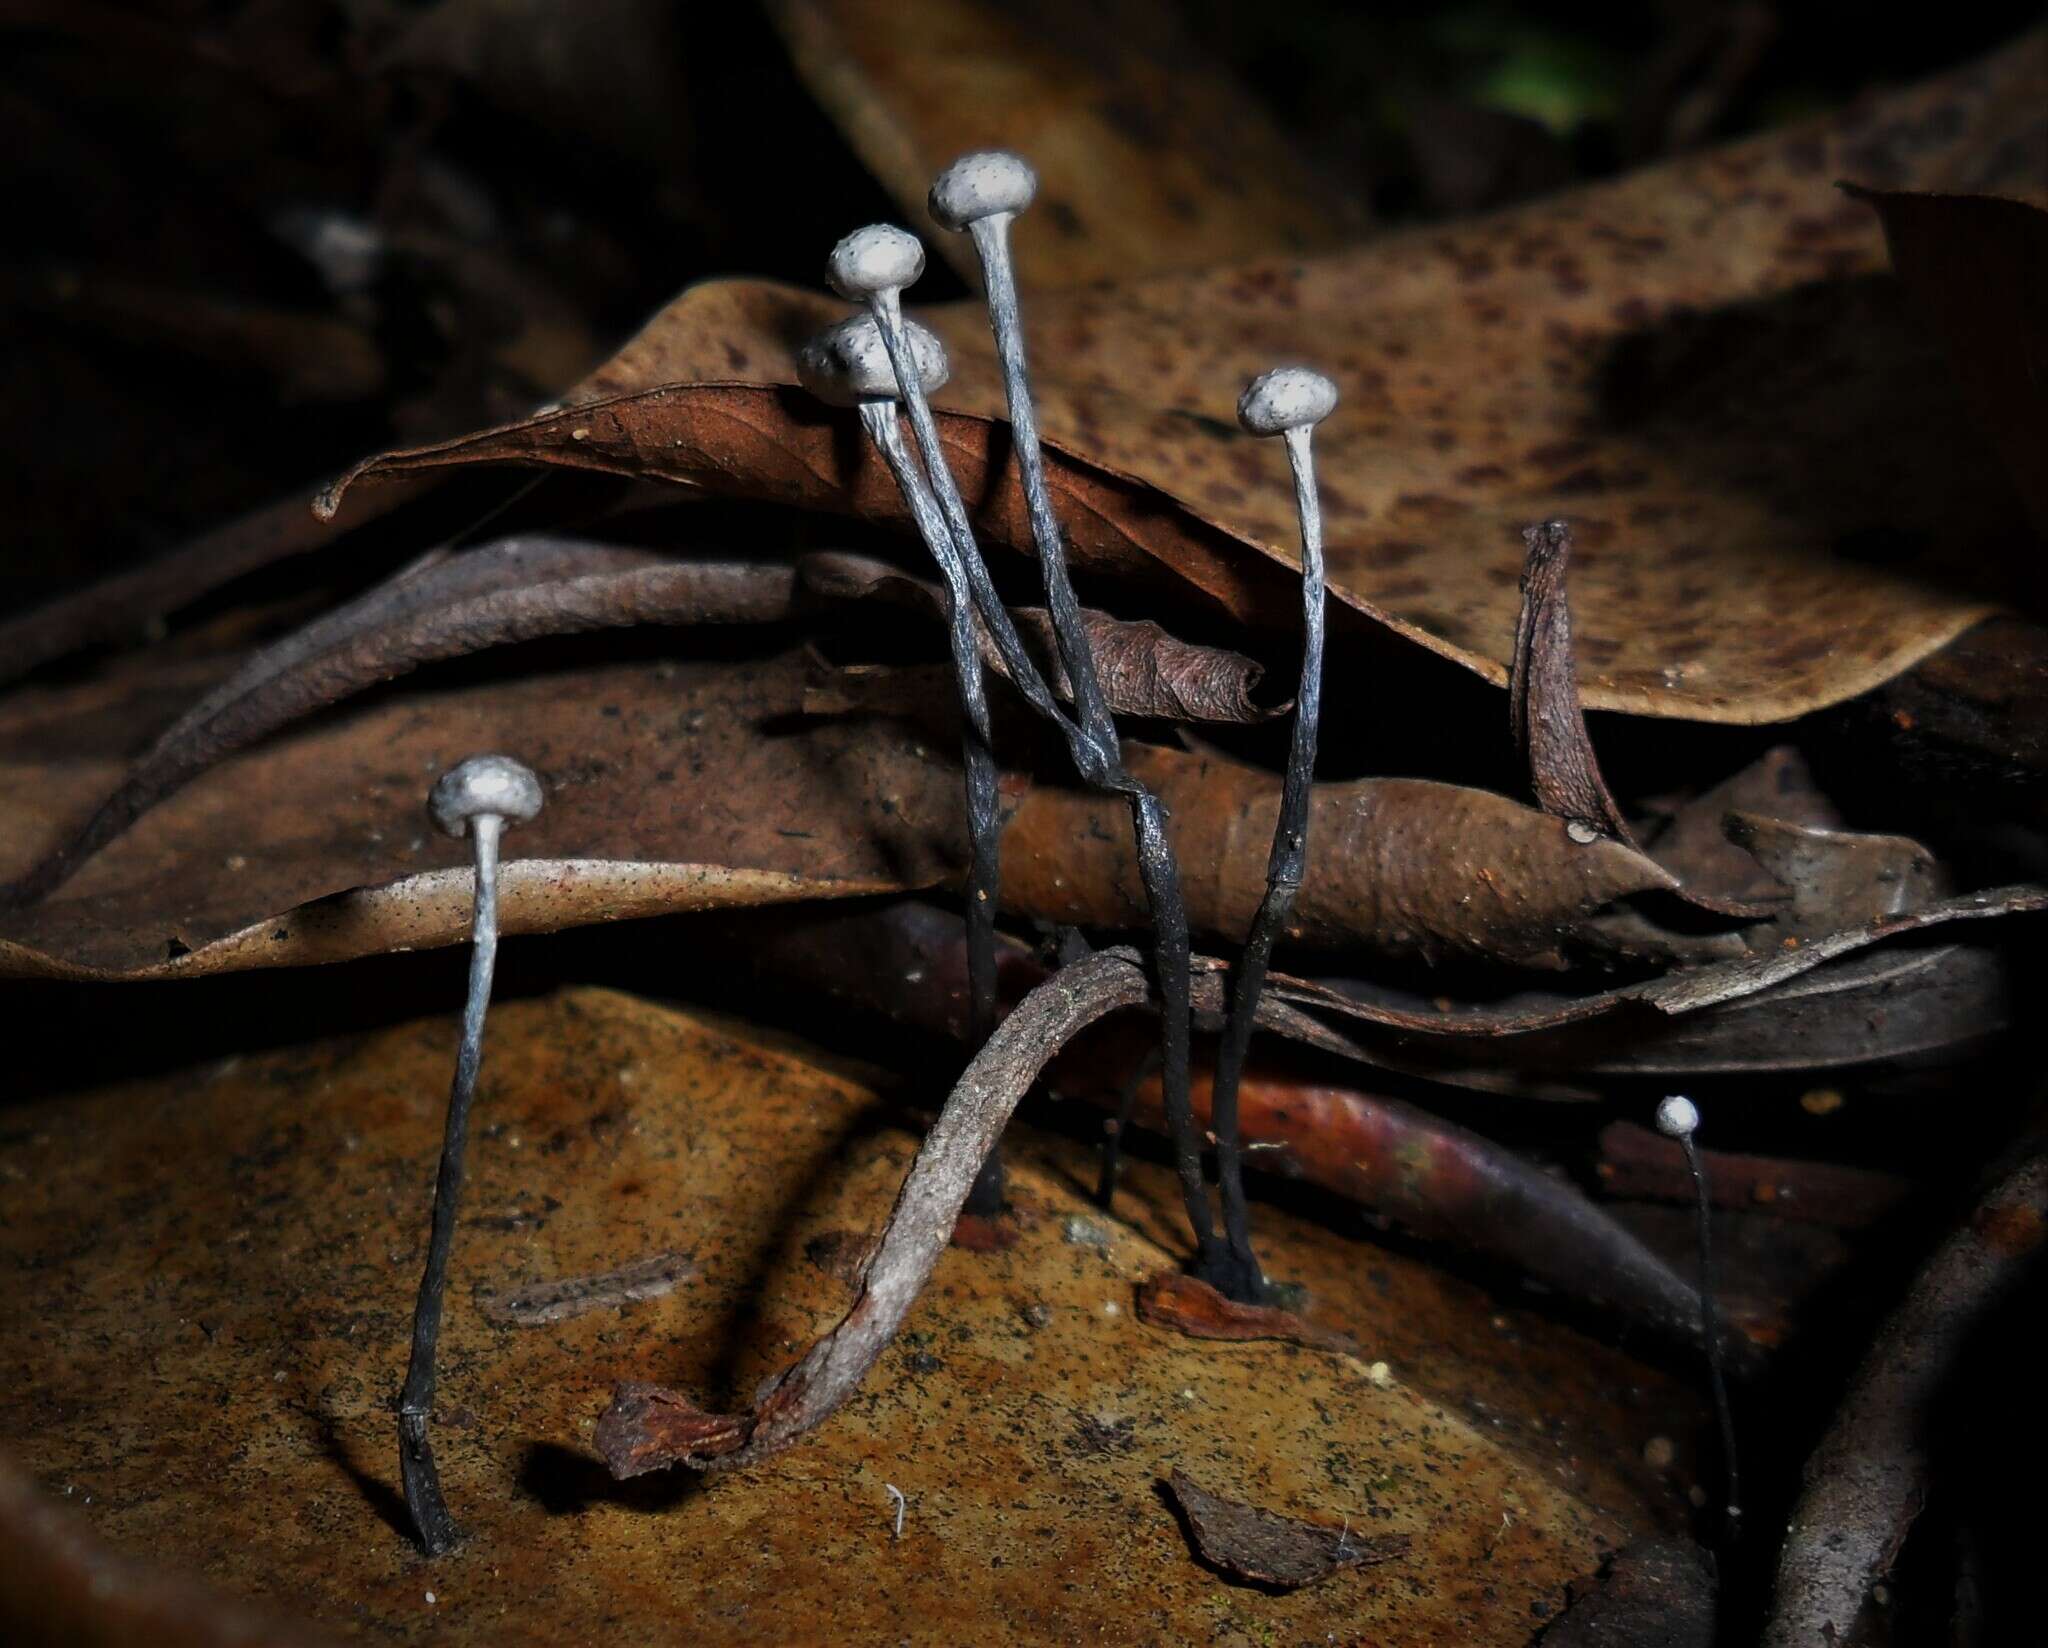 Image of Xylaria clusiae K. F. Rodrigues, J. D. Rogers & Samuels 1990